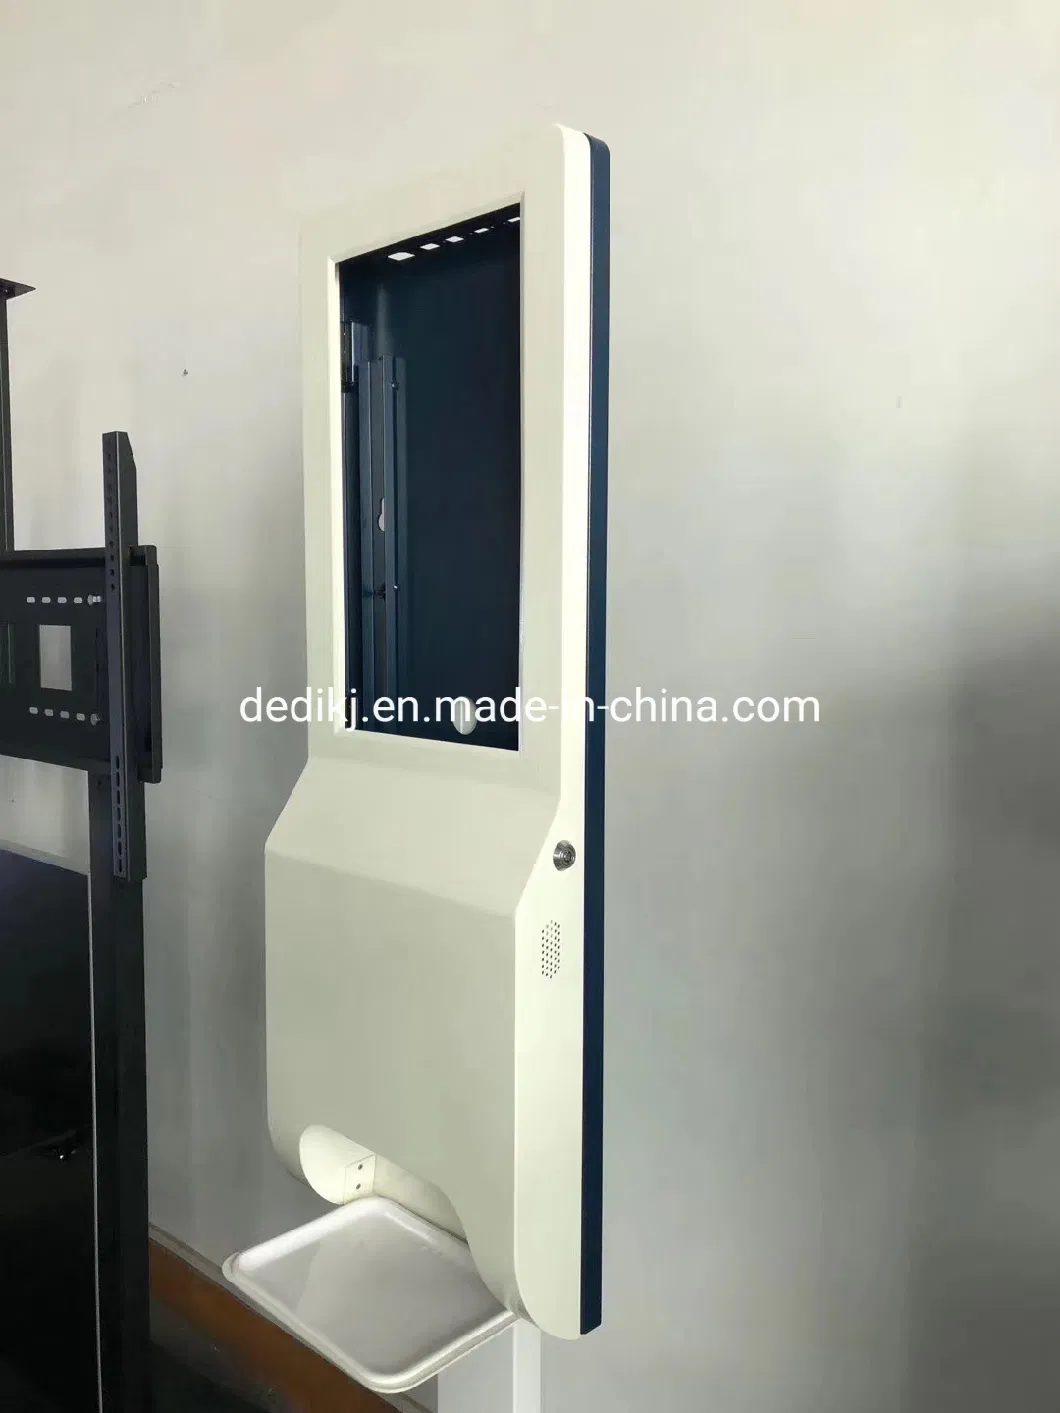 Spanish 8inch Access Control System for Public Location with Face Recognize Camera and Temperature Testing RFID Card Reader for Re-Open